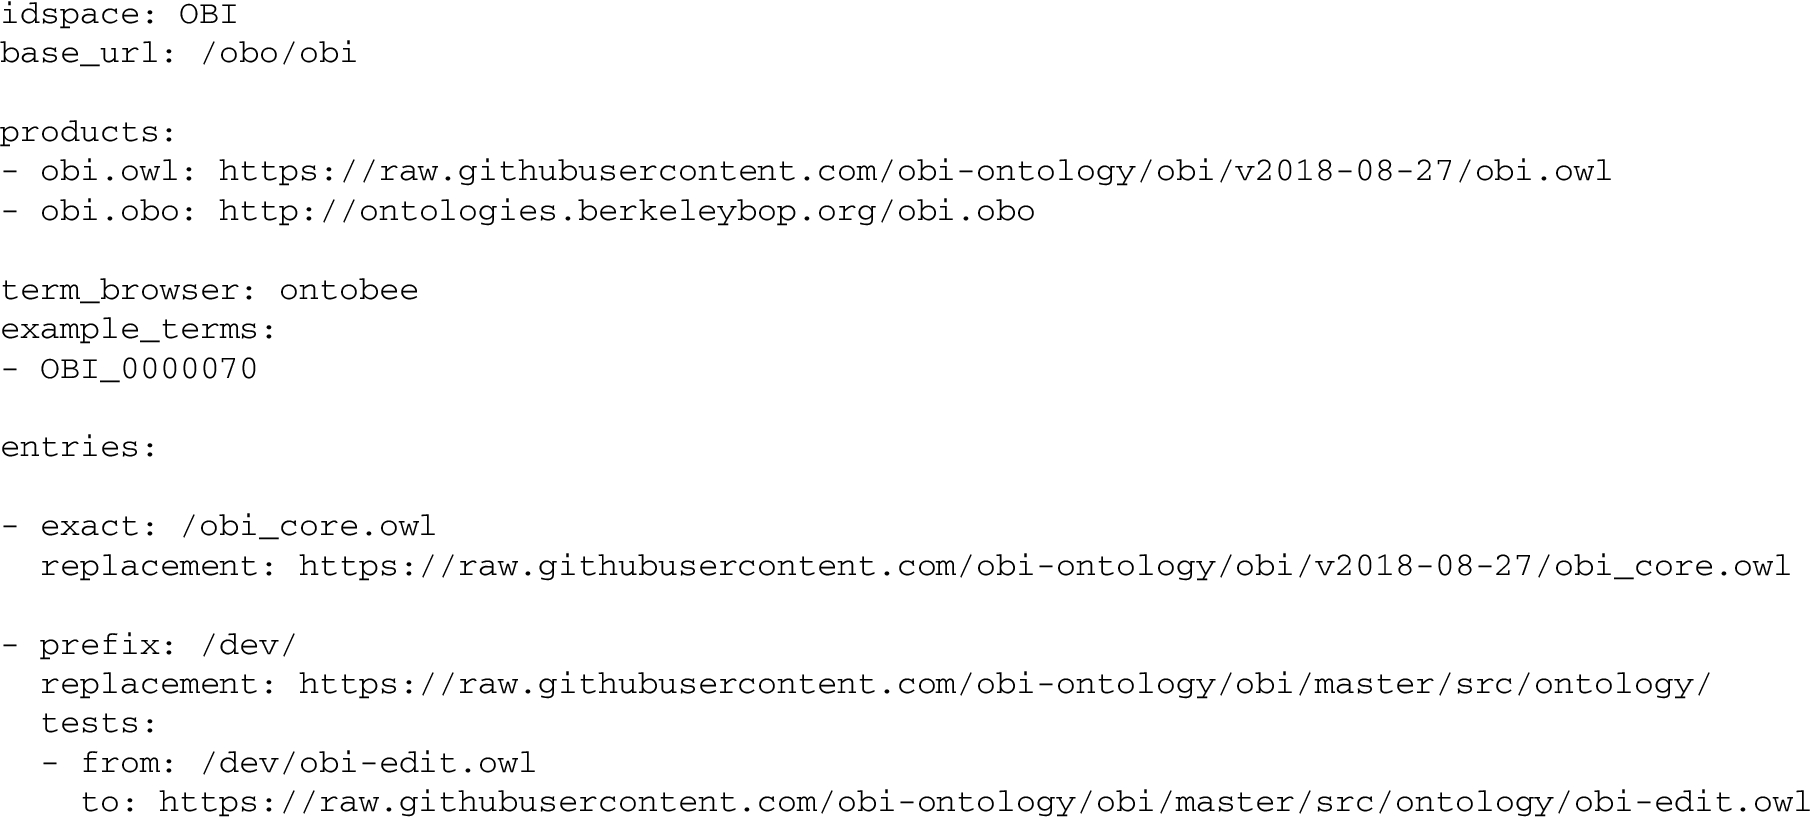 Exerpt from the YAML configuration file for OBI, showing all required PURL configuration information